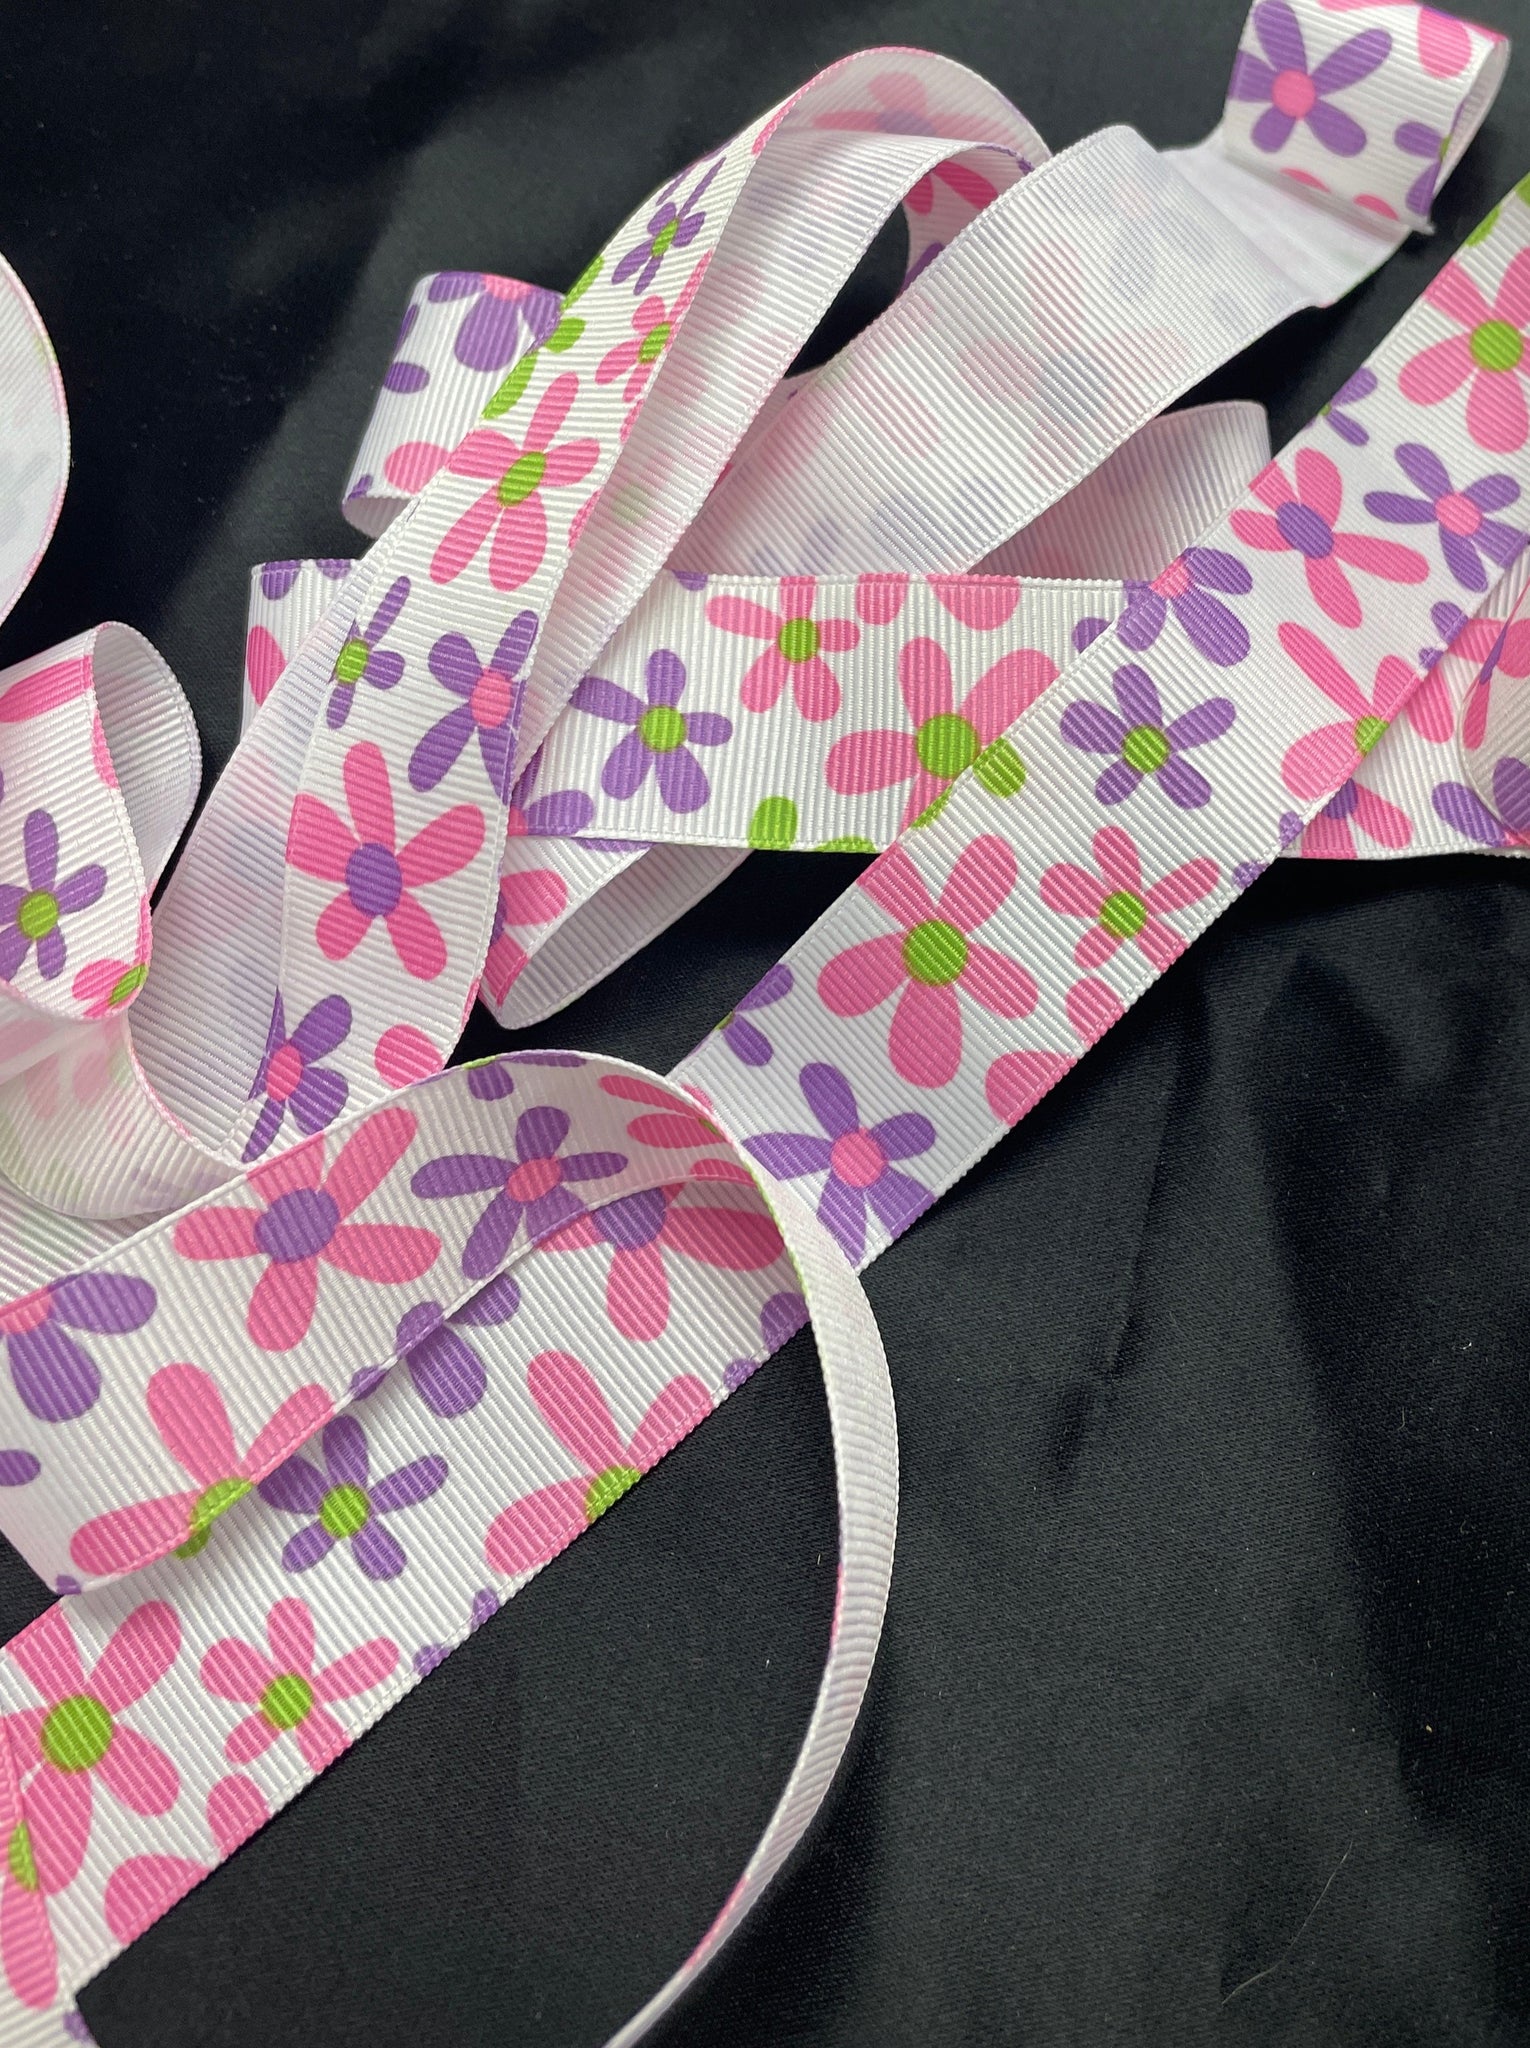 3 YD Polyester Printed Grosgrain Ribbon - White with Pink, Purple and Green Flowers